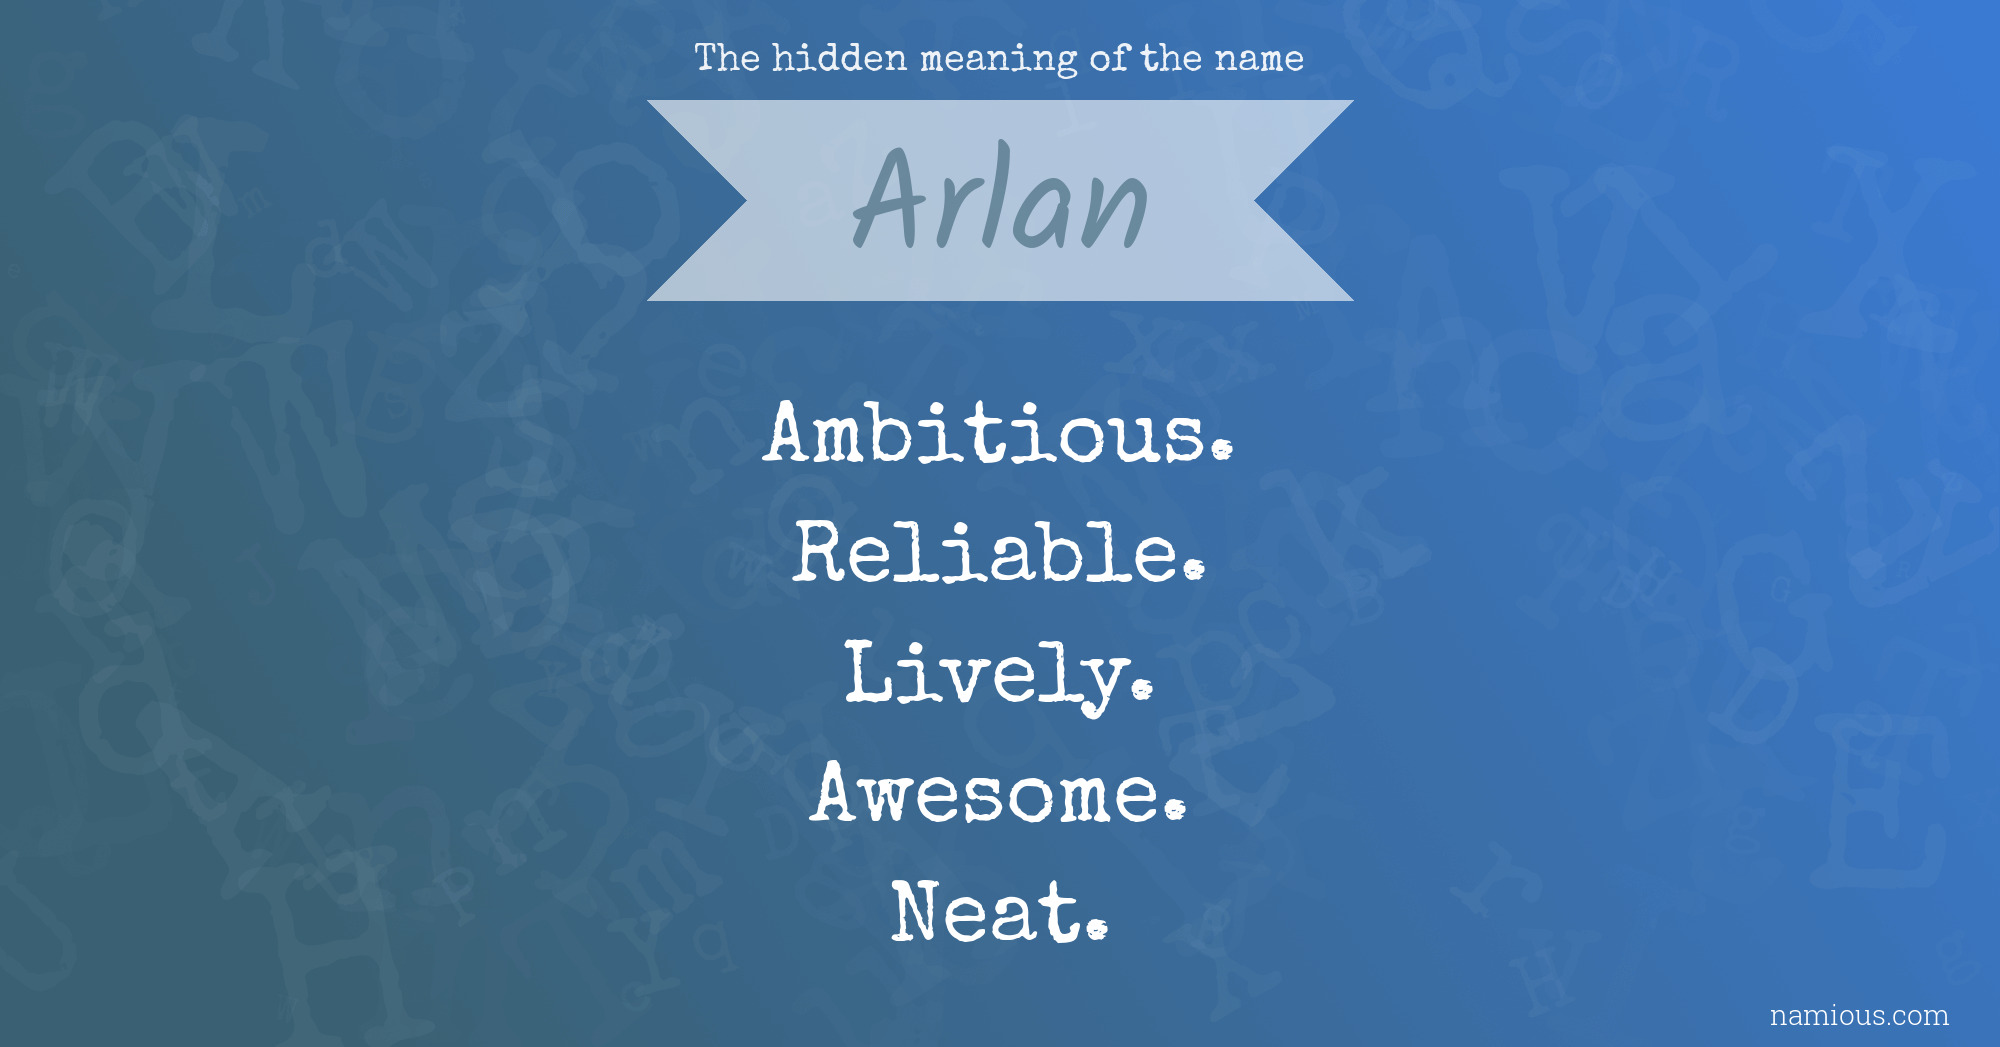 The hidden meaning of the name Arlan